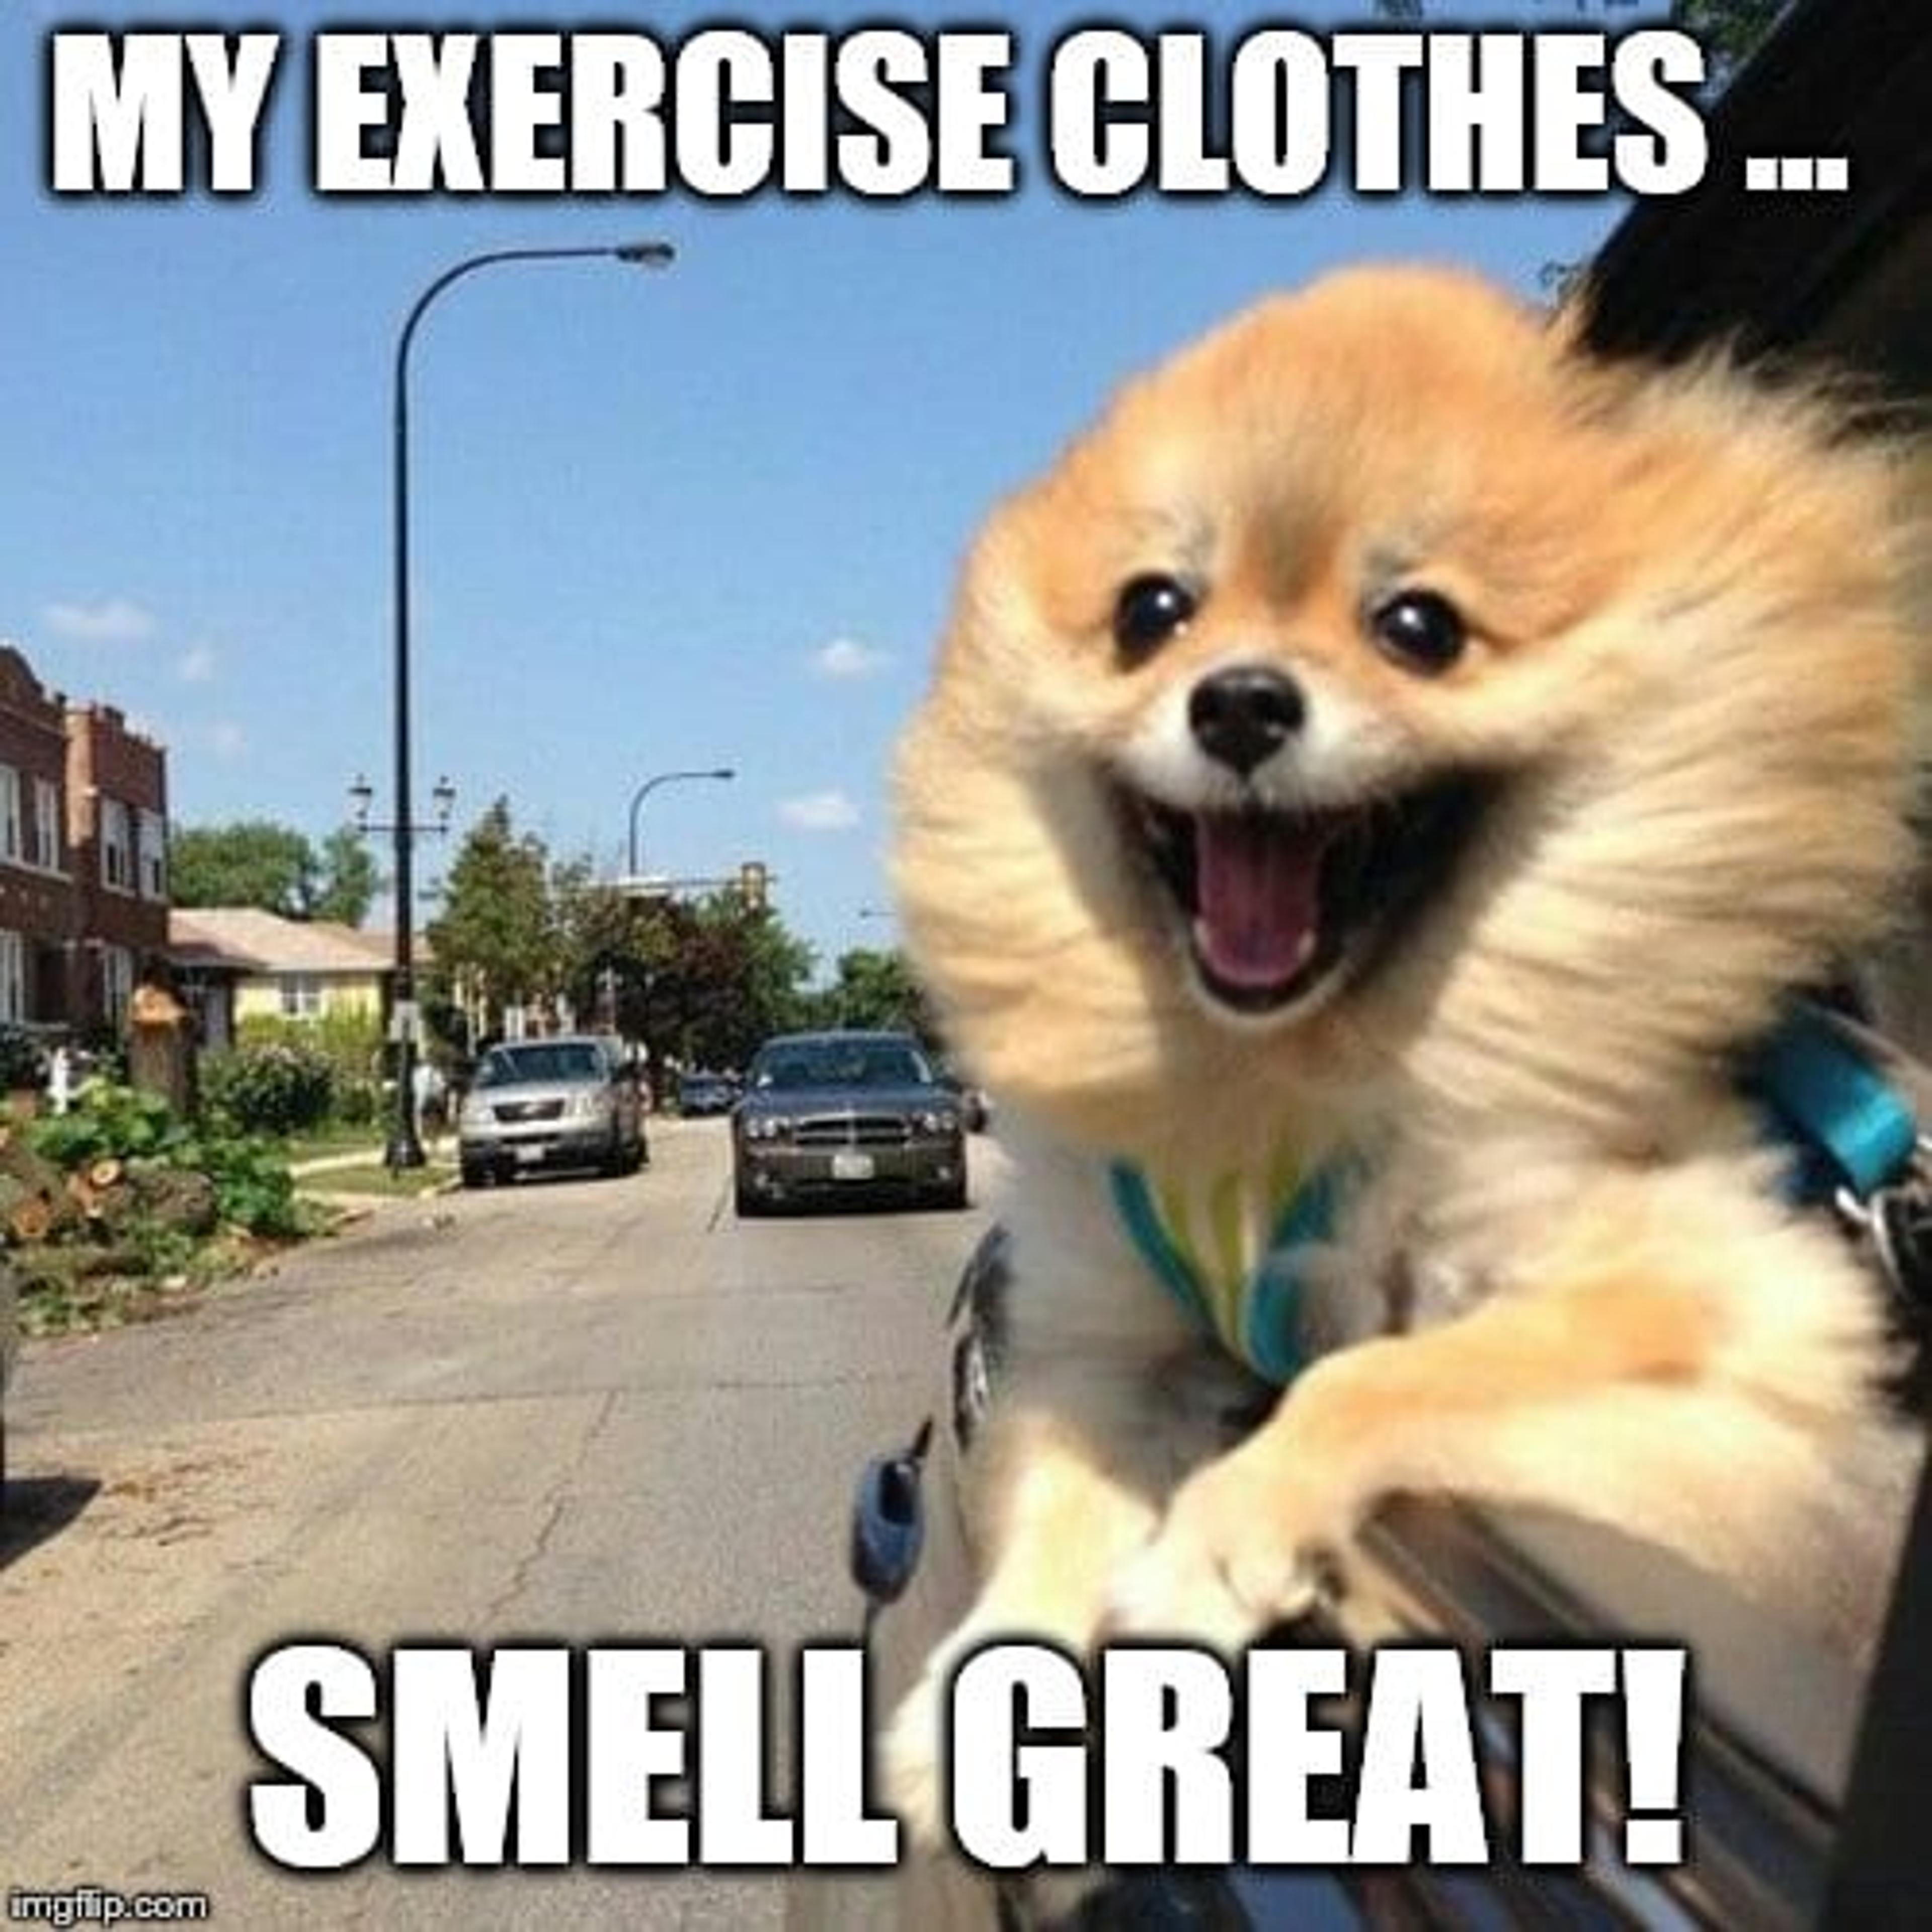 Meme of happy dog with caption: "My exercise clothes smell great!"